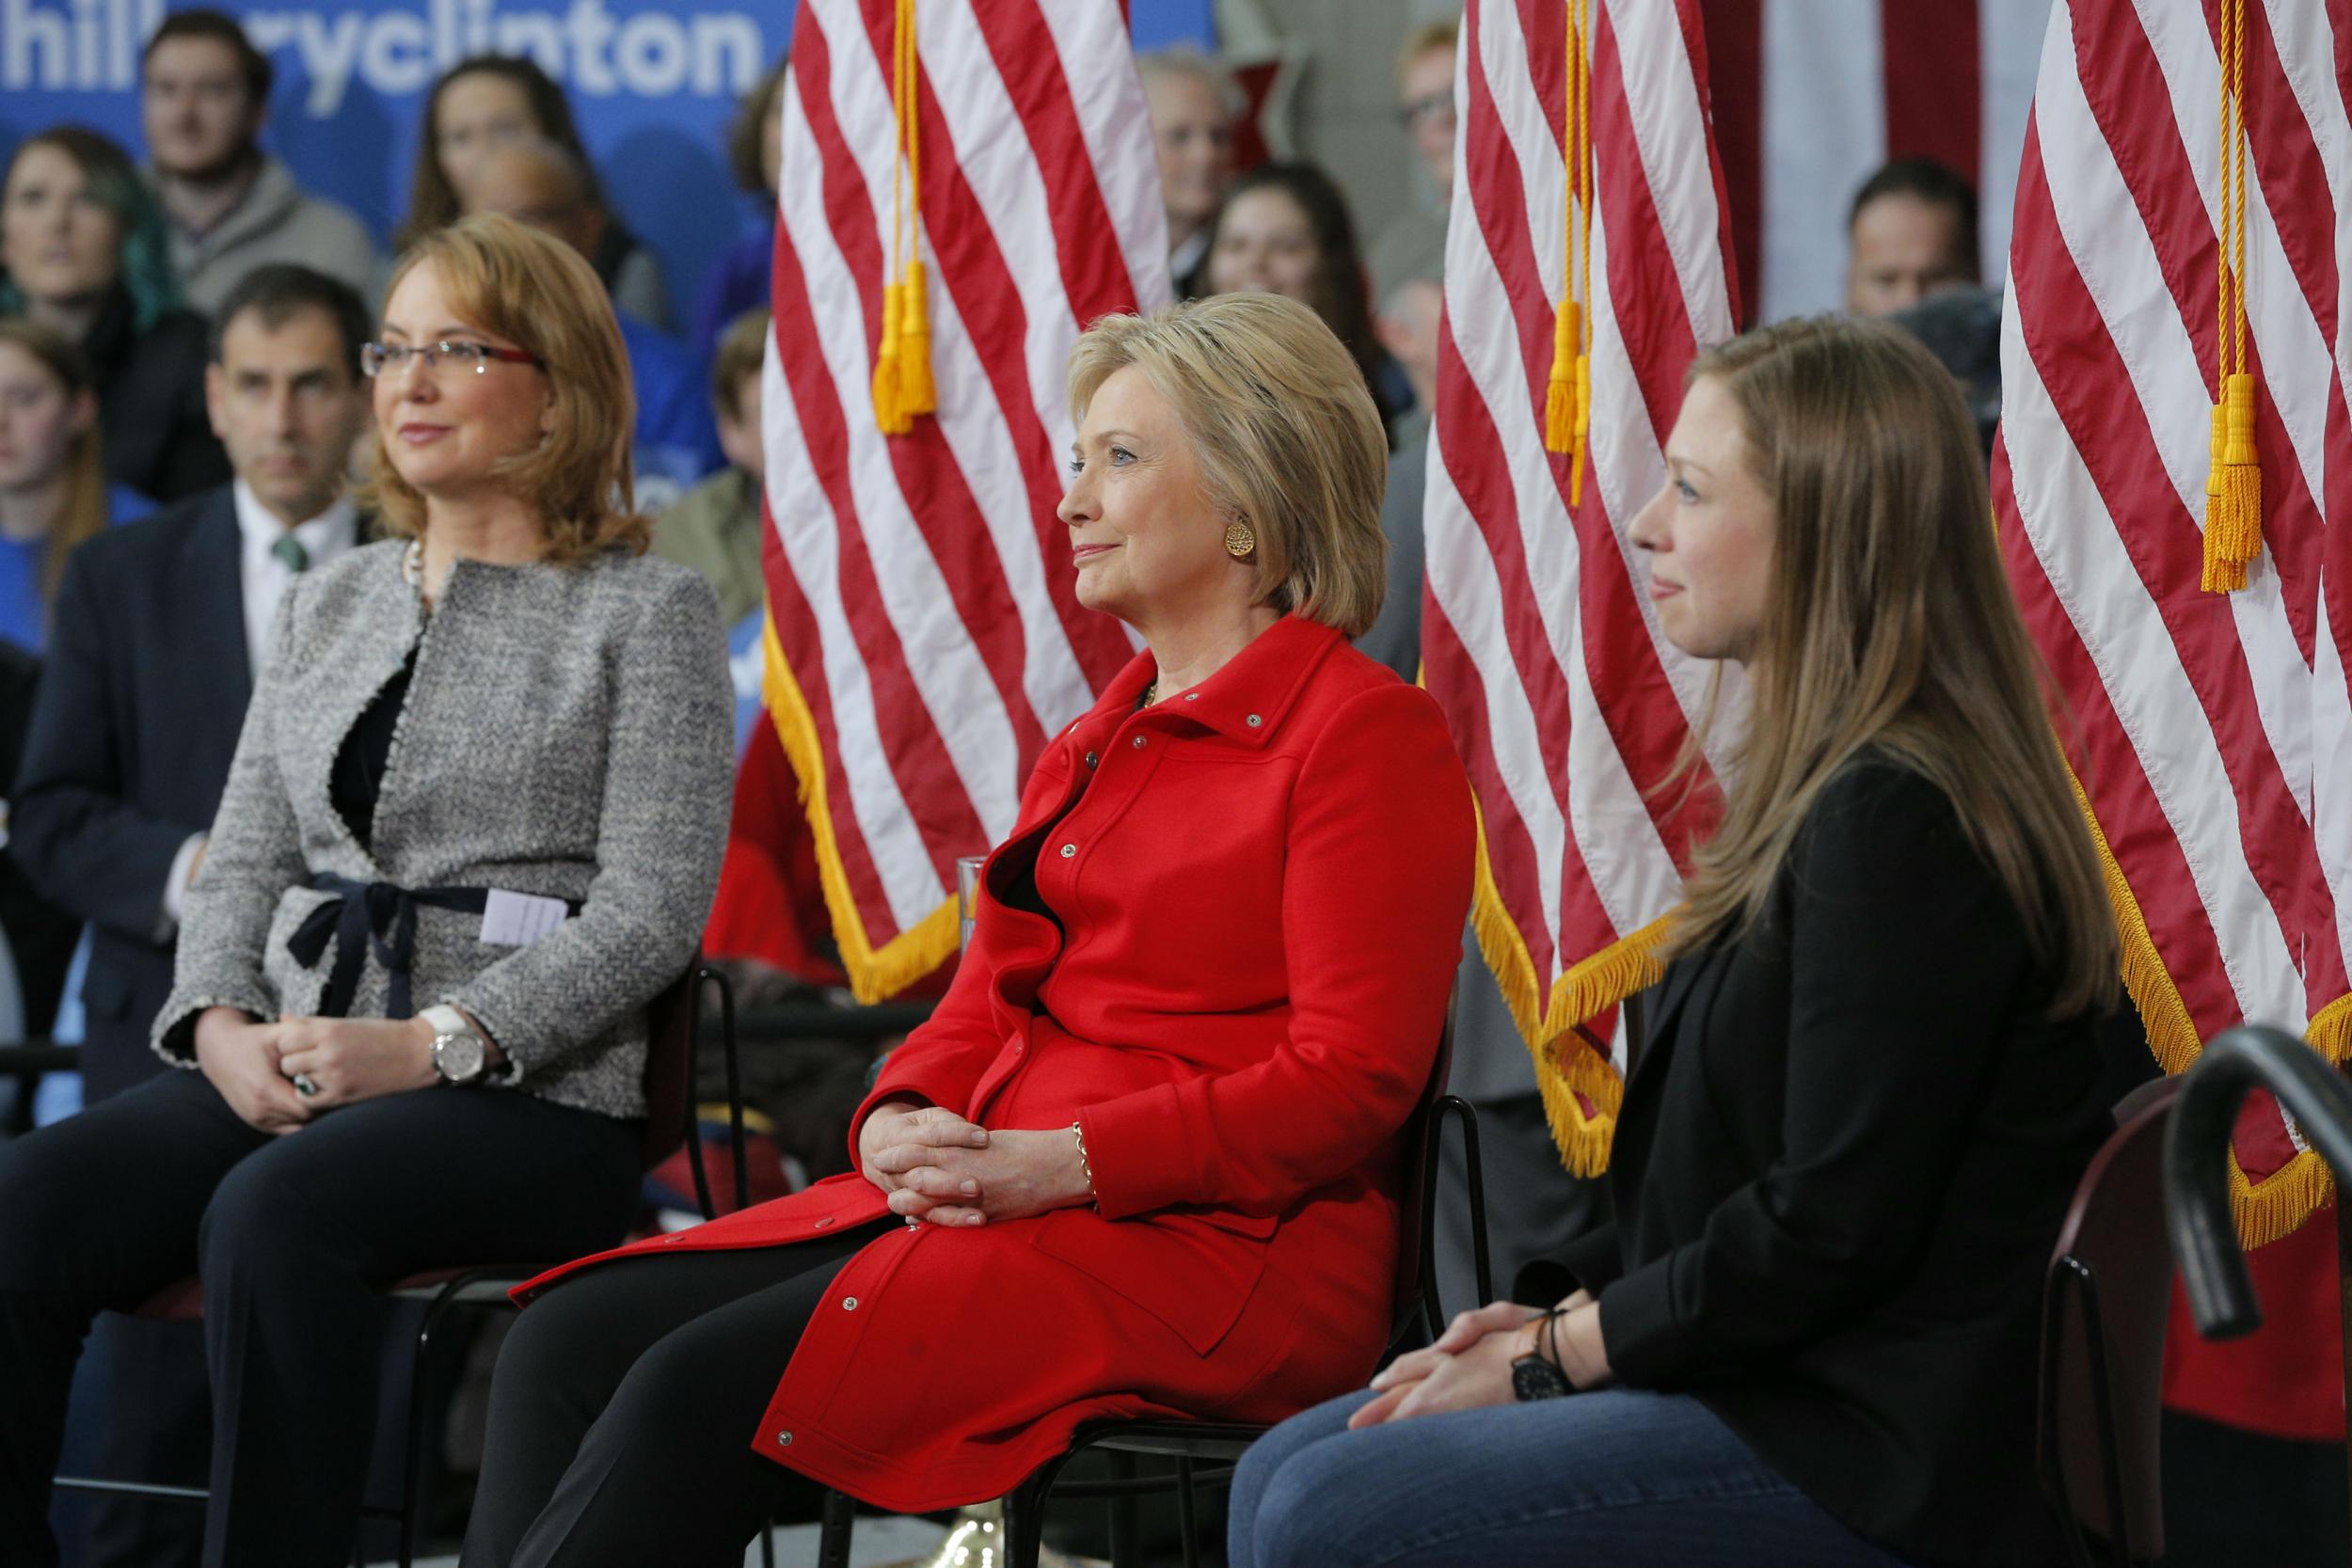 Gabby Giffords attended the event with Hillary Clinton, and her daughter, Chelsea